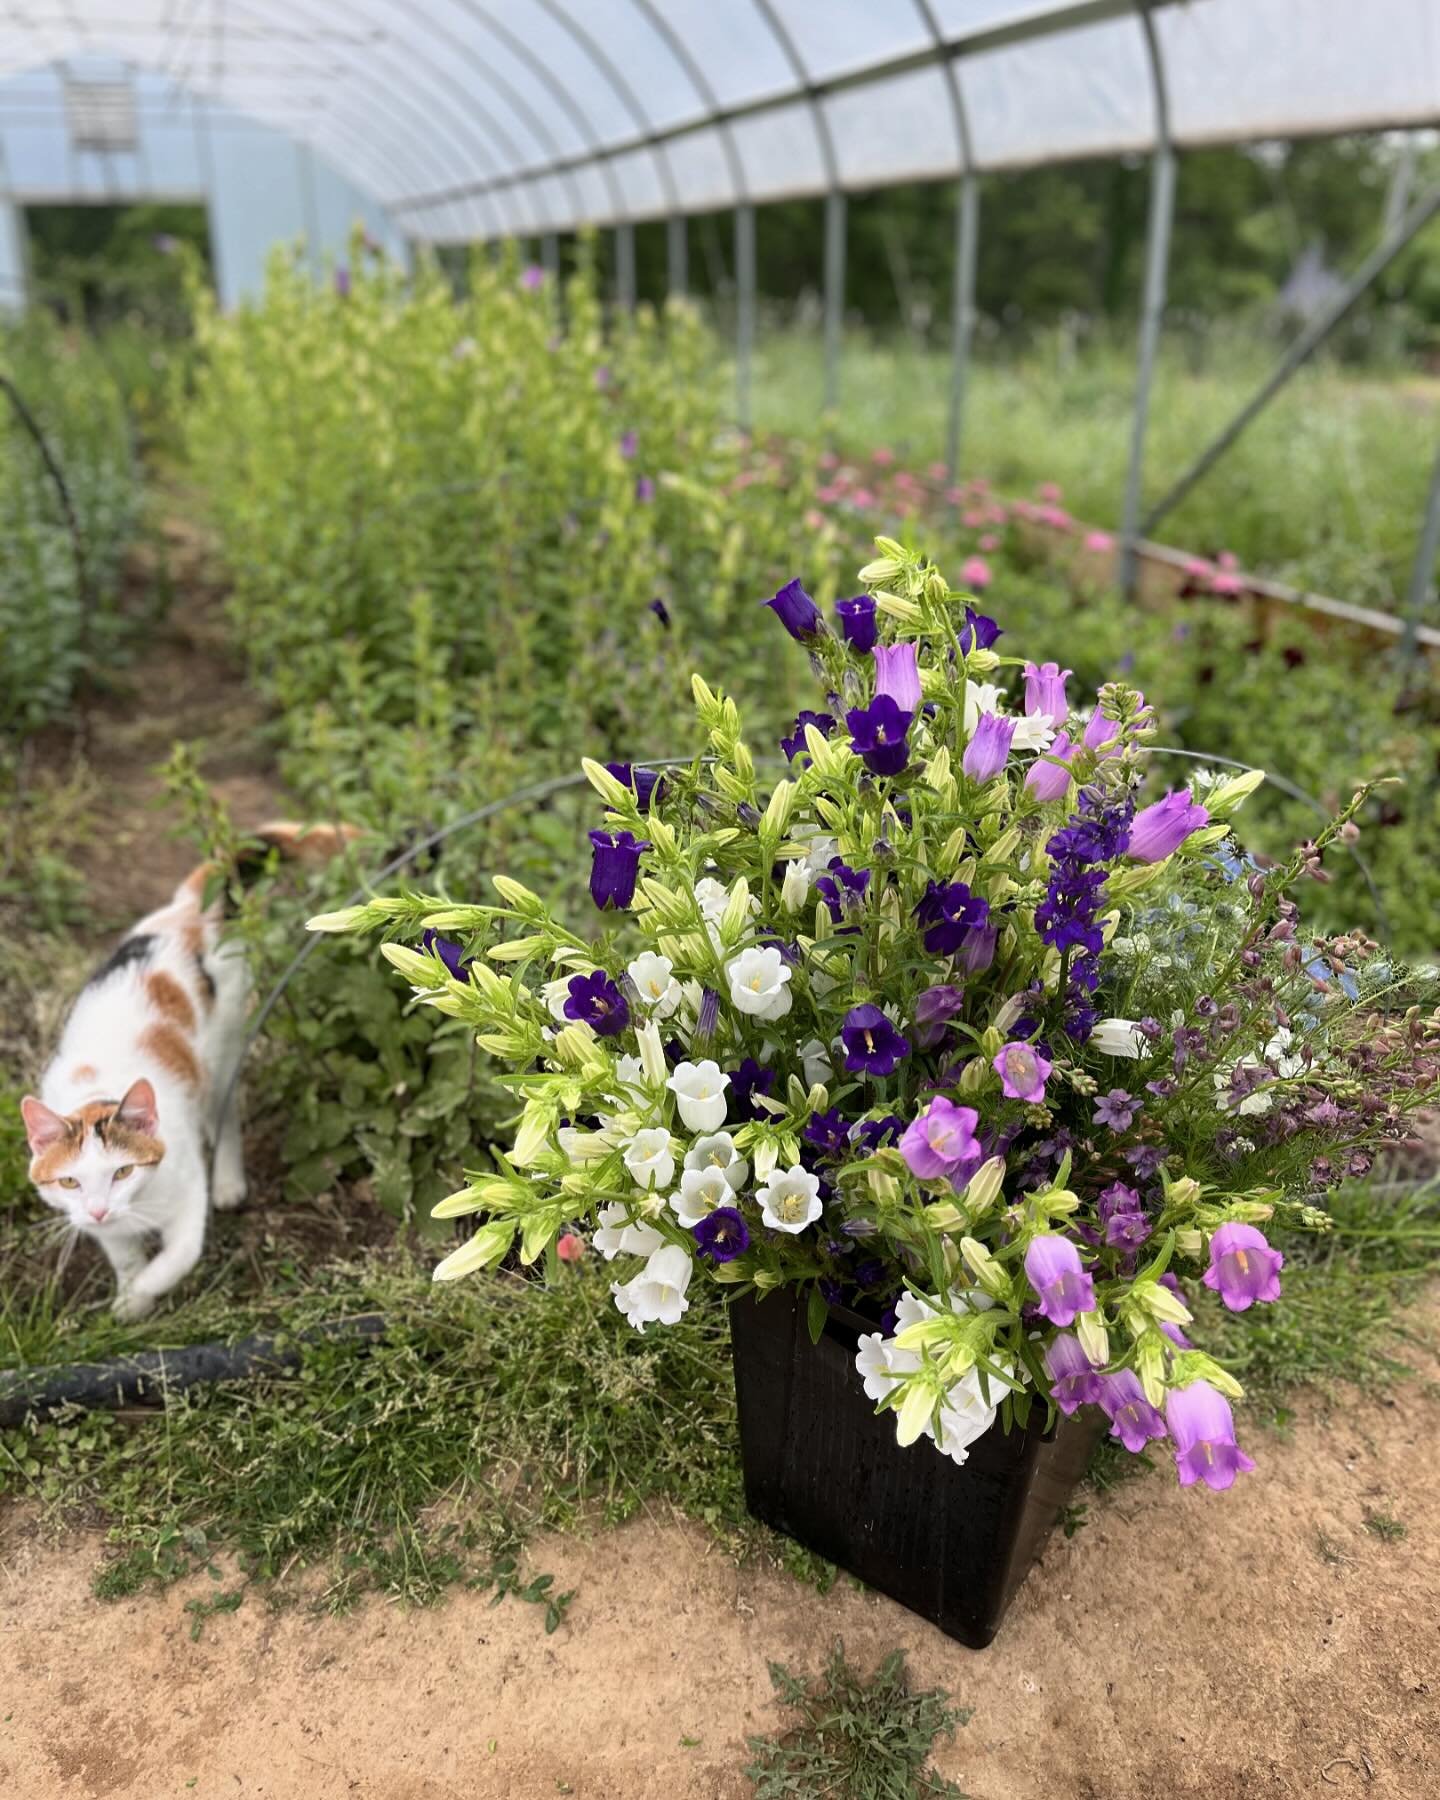 Campanula Champion variety&mdash; coming in Hot! Find these beautiful, long lasting blooms at Lexington and Douglass Loop farmers markets this Saturday. 
*****
#canterburybells #bellflower #freshcut #flowers #locallygrown #knowyourfarmer